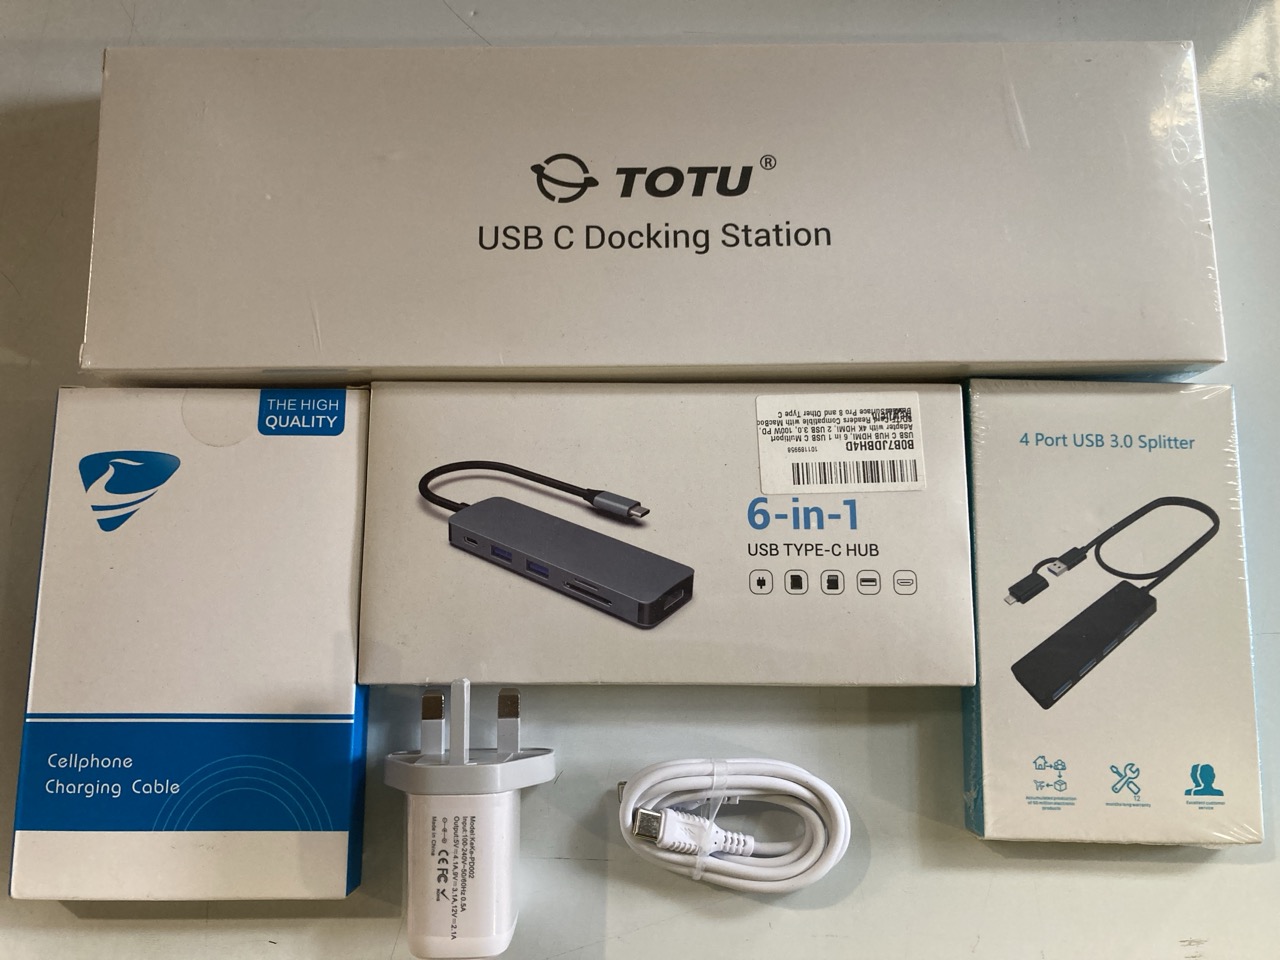 A QTY OF TOTU USB C DOCKING STATIONS (MODEL TT-DC005) TOGETHER WITH CELL PHONE CHARGING CABLES (B075JYJF67)